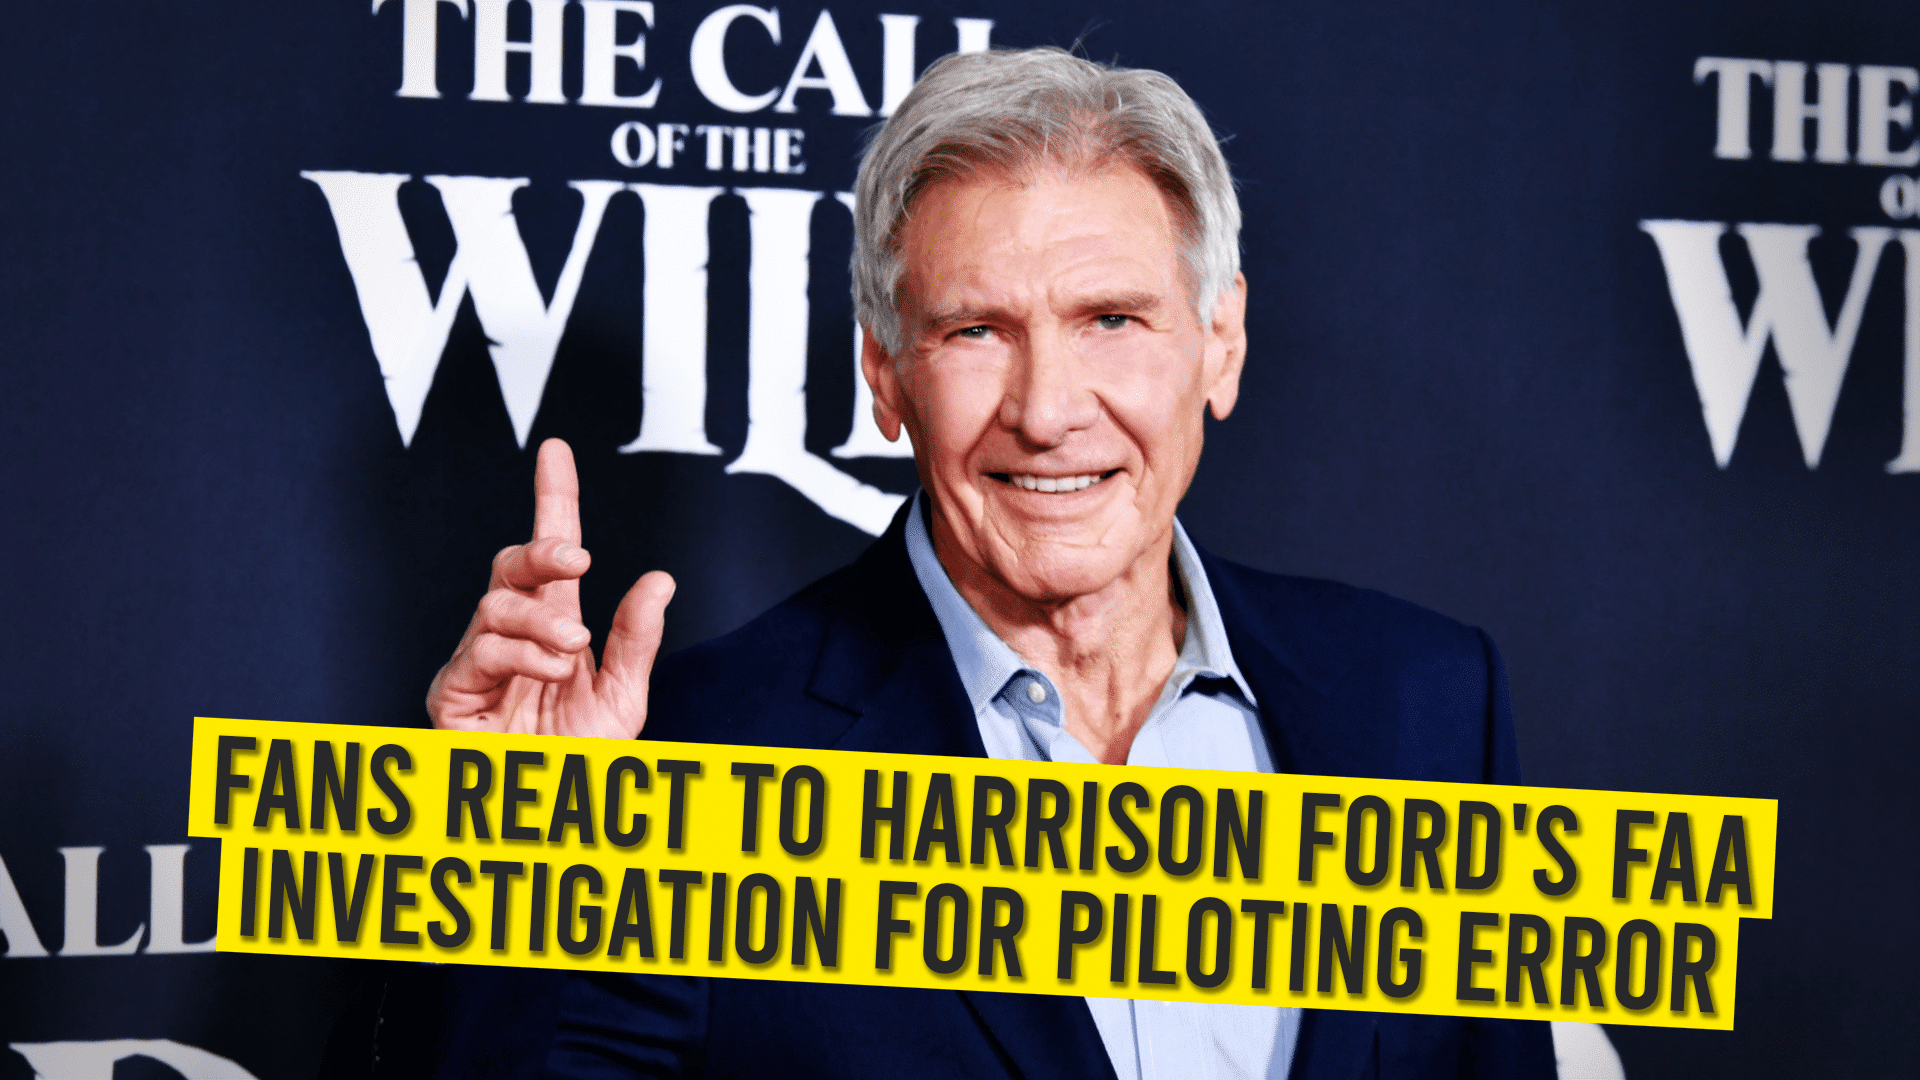 05 Fans React to Harrison Fords FAA Investigation for Piloting Error